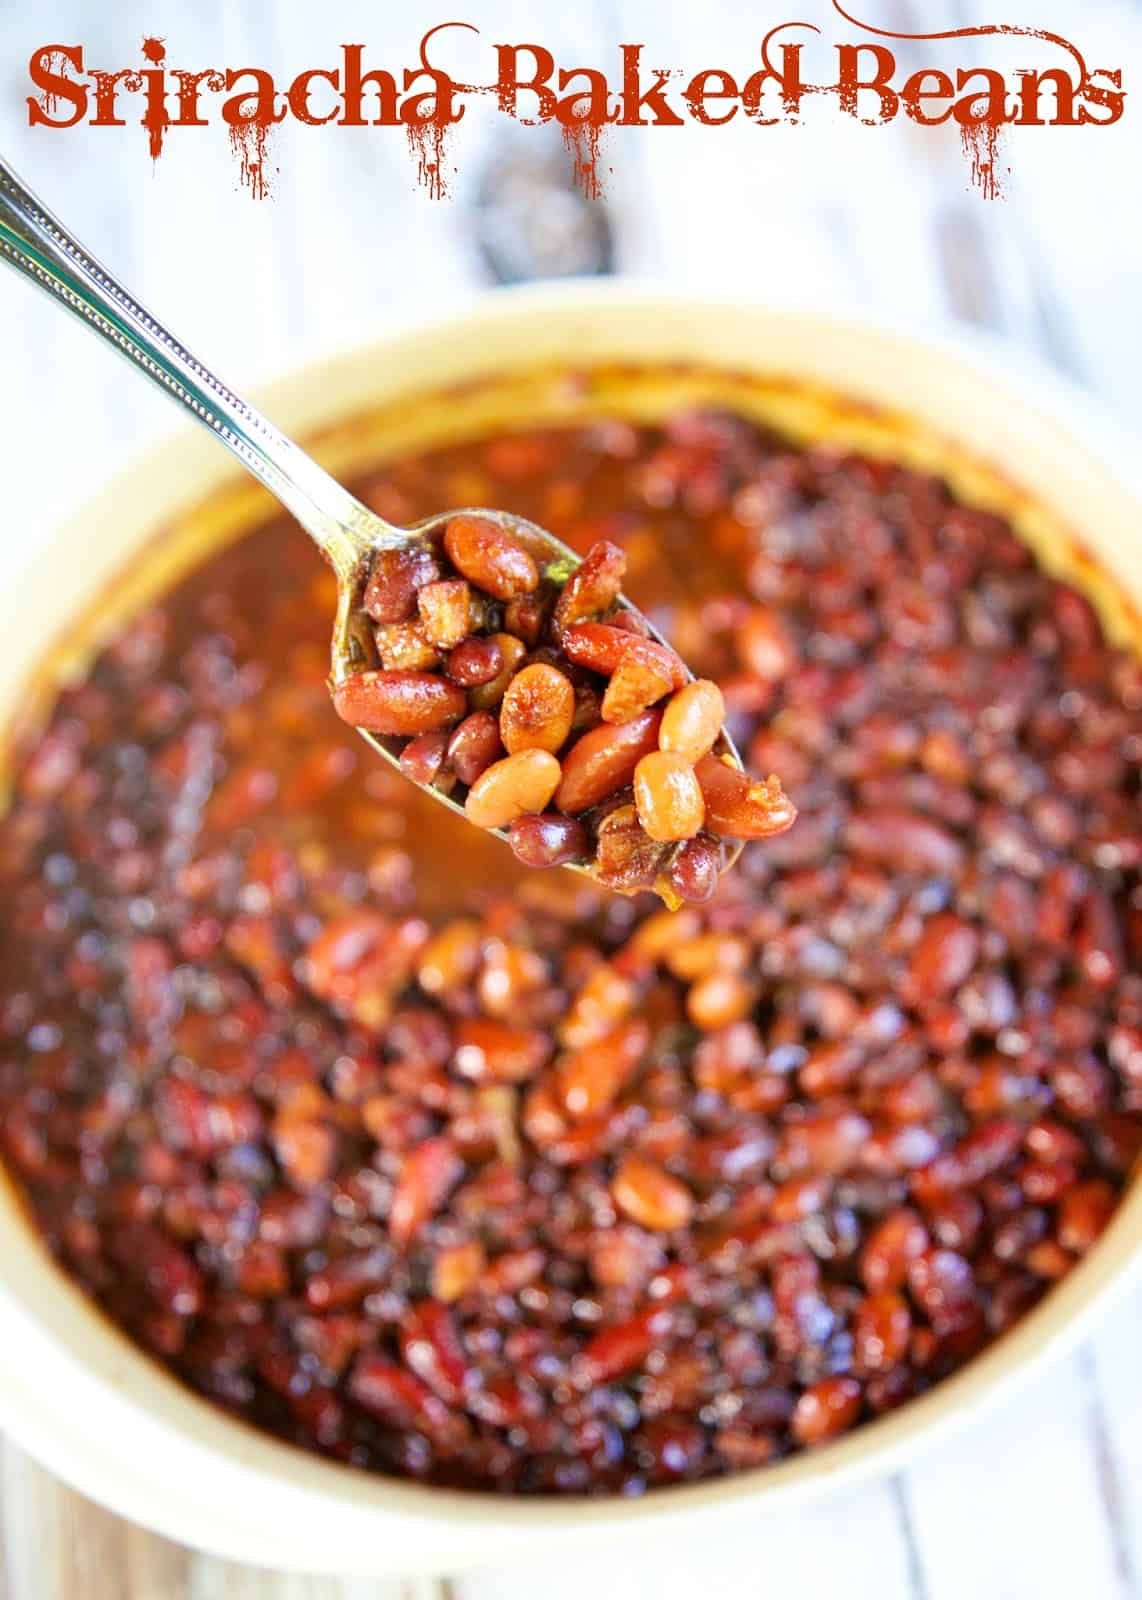 Sriracha Baked Beans - smoked sausage, onion, chicken broth, brown sugar, apple cider vinegar Sriracha, molasses, mustard, chili powder, salt, black beans, kidney beans and pinto beans - mix together and bake. Ready in 30 minutes. They are a little sweet and smoky and a lot of delicious! Great side dish for a potluck or cook-out. 